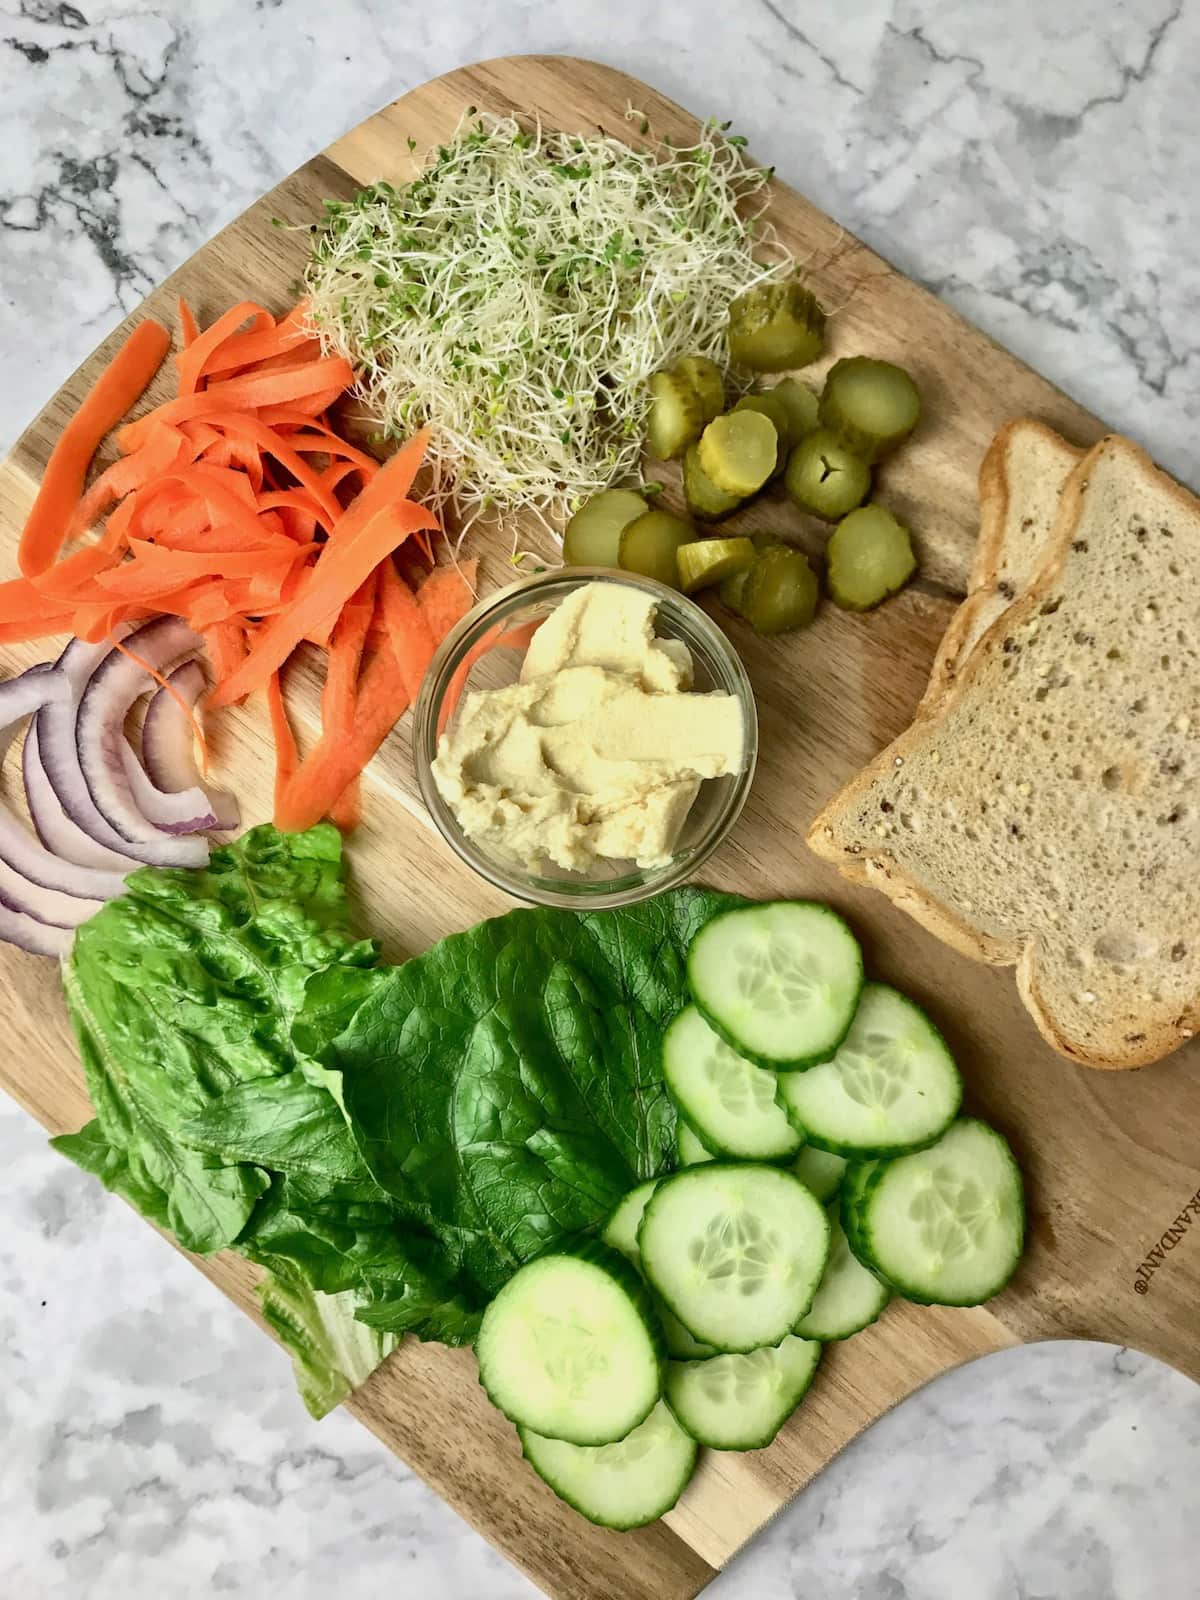 A board of sandwich ingredients, including hummus, pickles, cucumber, carrot, onion, sprouts, and lettuce.